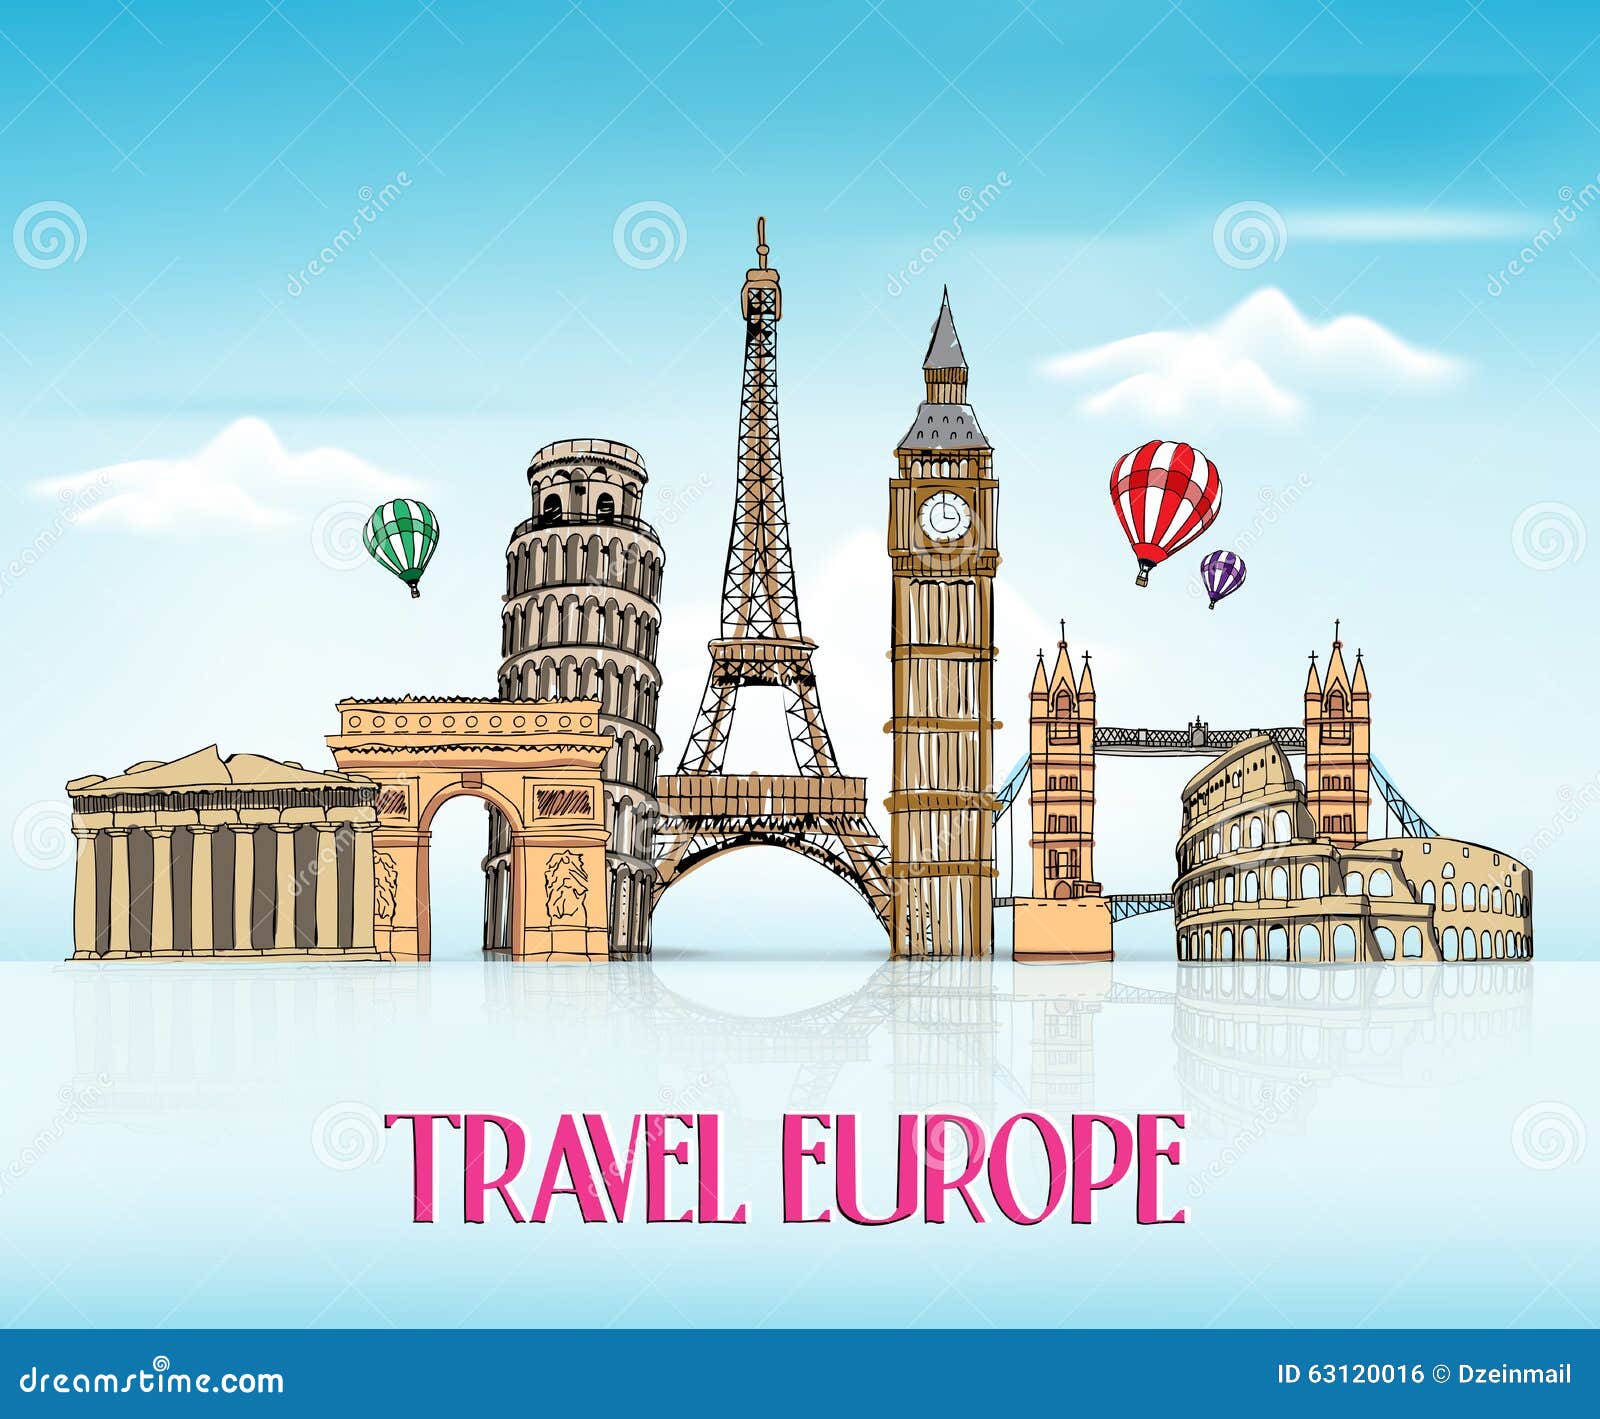 travel europe hand drawing with famous landmarks